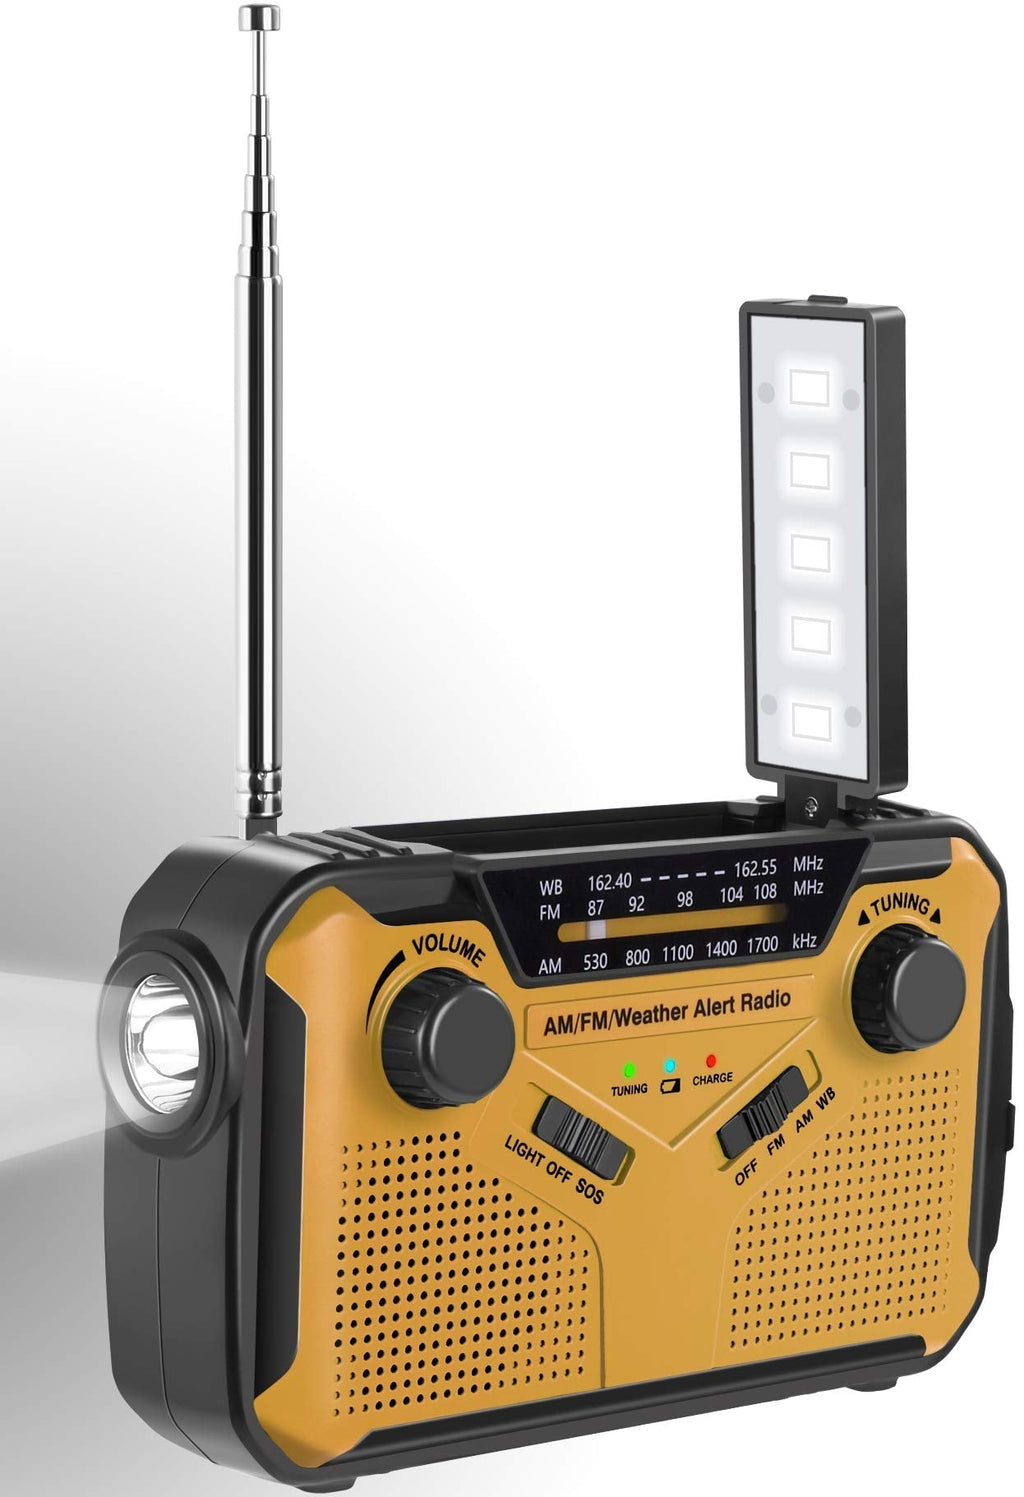  [AUSTRALIA] - Emergency Radio, ZHIWHIS NOAA Weather/AM/FM Portable Hand Crank Solar Radios with SOS Alarm, Battery Powered and Built-in 2500mAh Power Bank, Flashlight and Reading Lamp for Camping, Hurricane, Home 369-Yellow